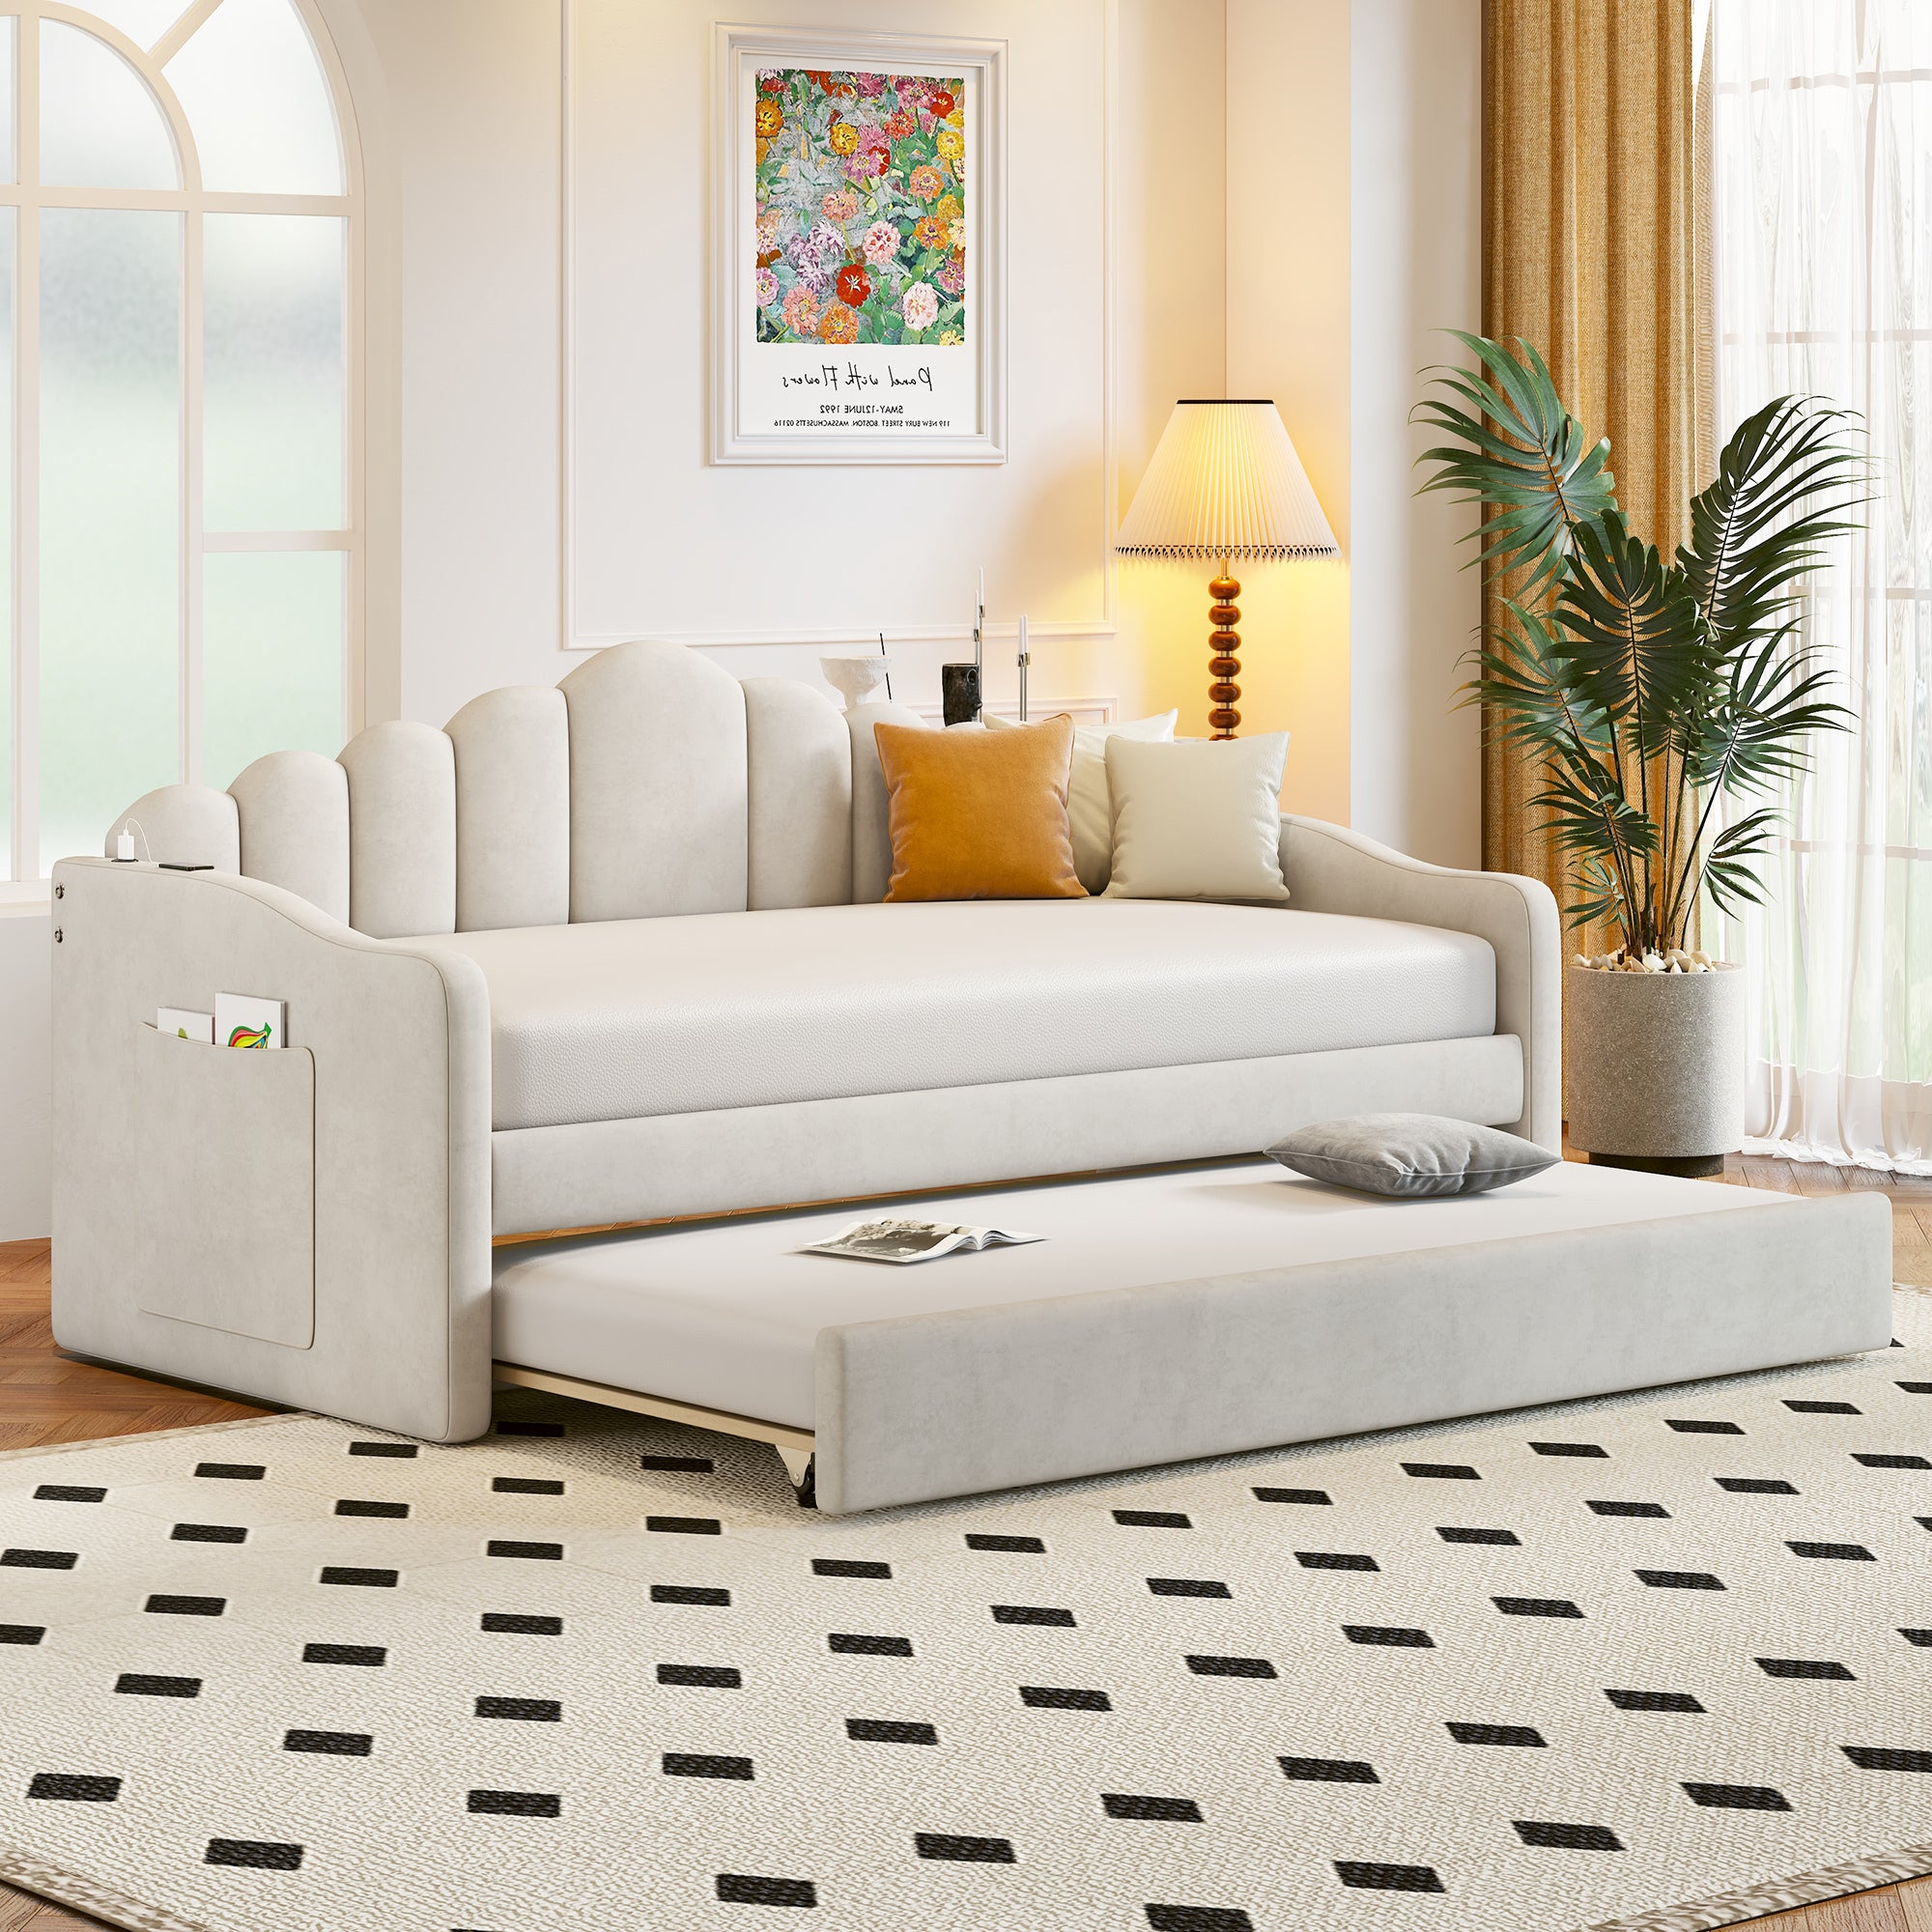 Auroglint Twin size Upholstered Daybed with Trundle ,Velvet Sofabed with USB Charging Ports,No Box-spring Needed,Beige